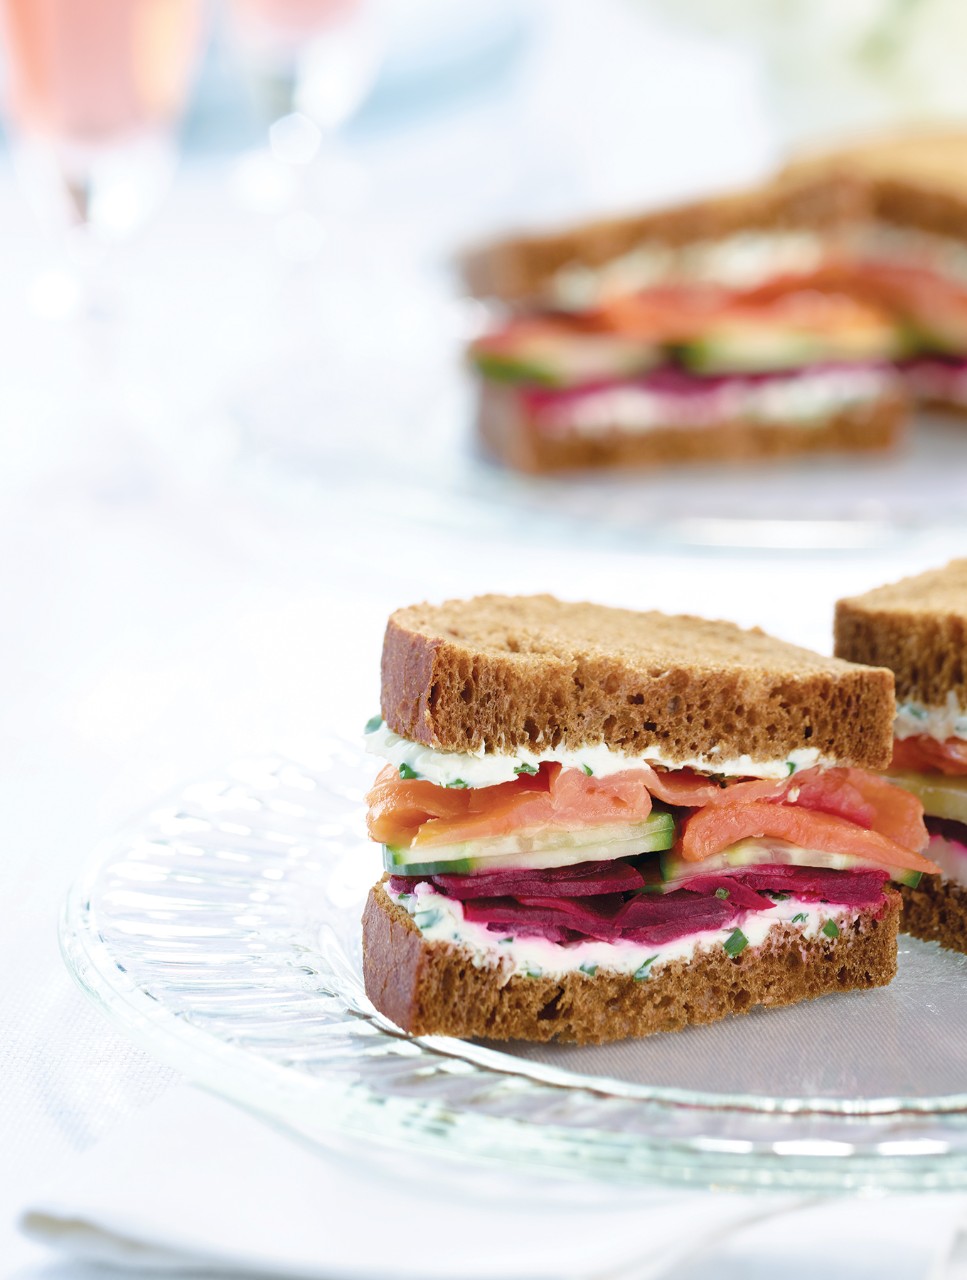 Smoked Salmon & Pickled Beets on Rye